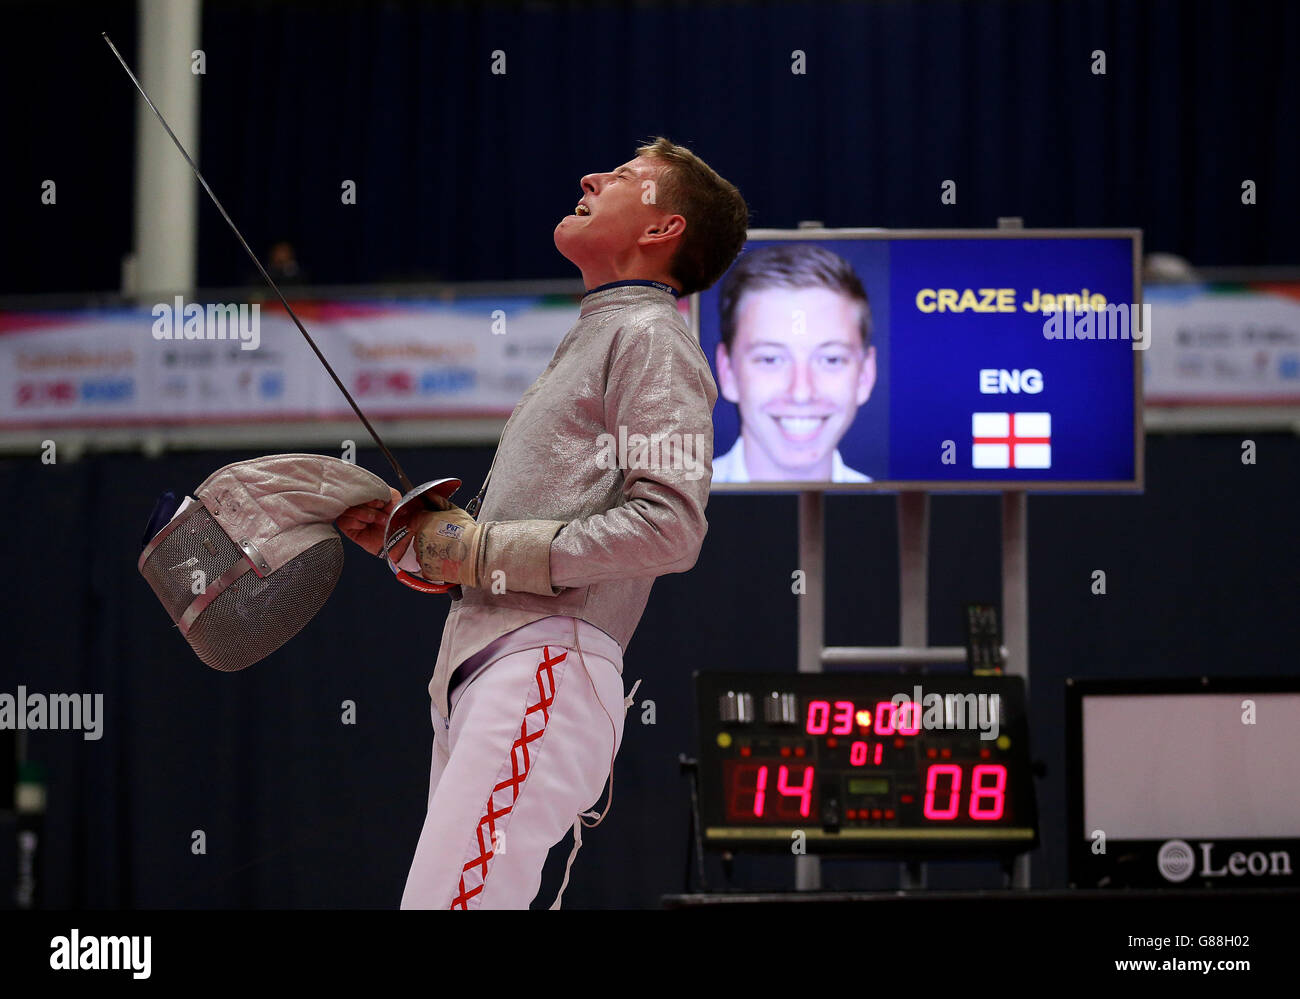 England's Jamie Craze celebrates winning the Men's Sabre Final at the fencing during the Sainsbury's 2015 School Games in Manchester. PRESS ASSOCIATION Photo. Picture date: Saturday September 5, 2015. Photo credit should read: Steven Paston/PA Wire Stock Photo